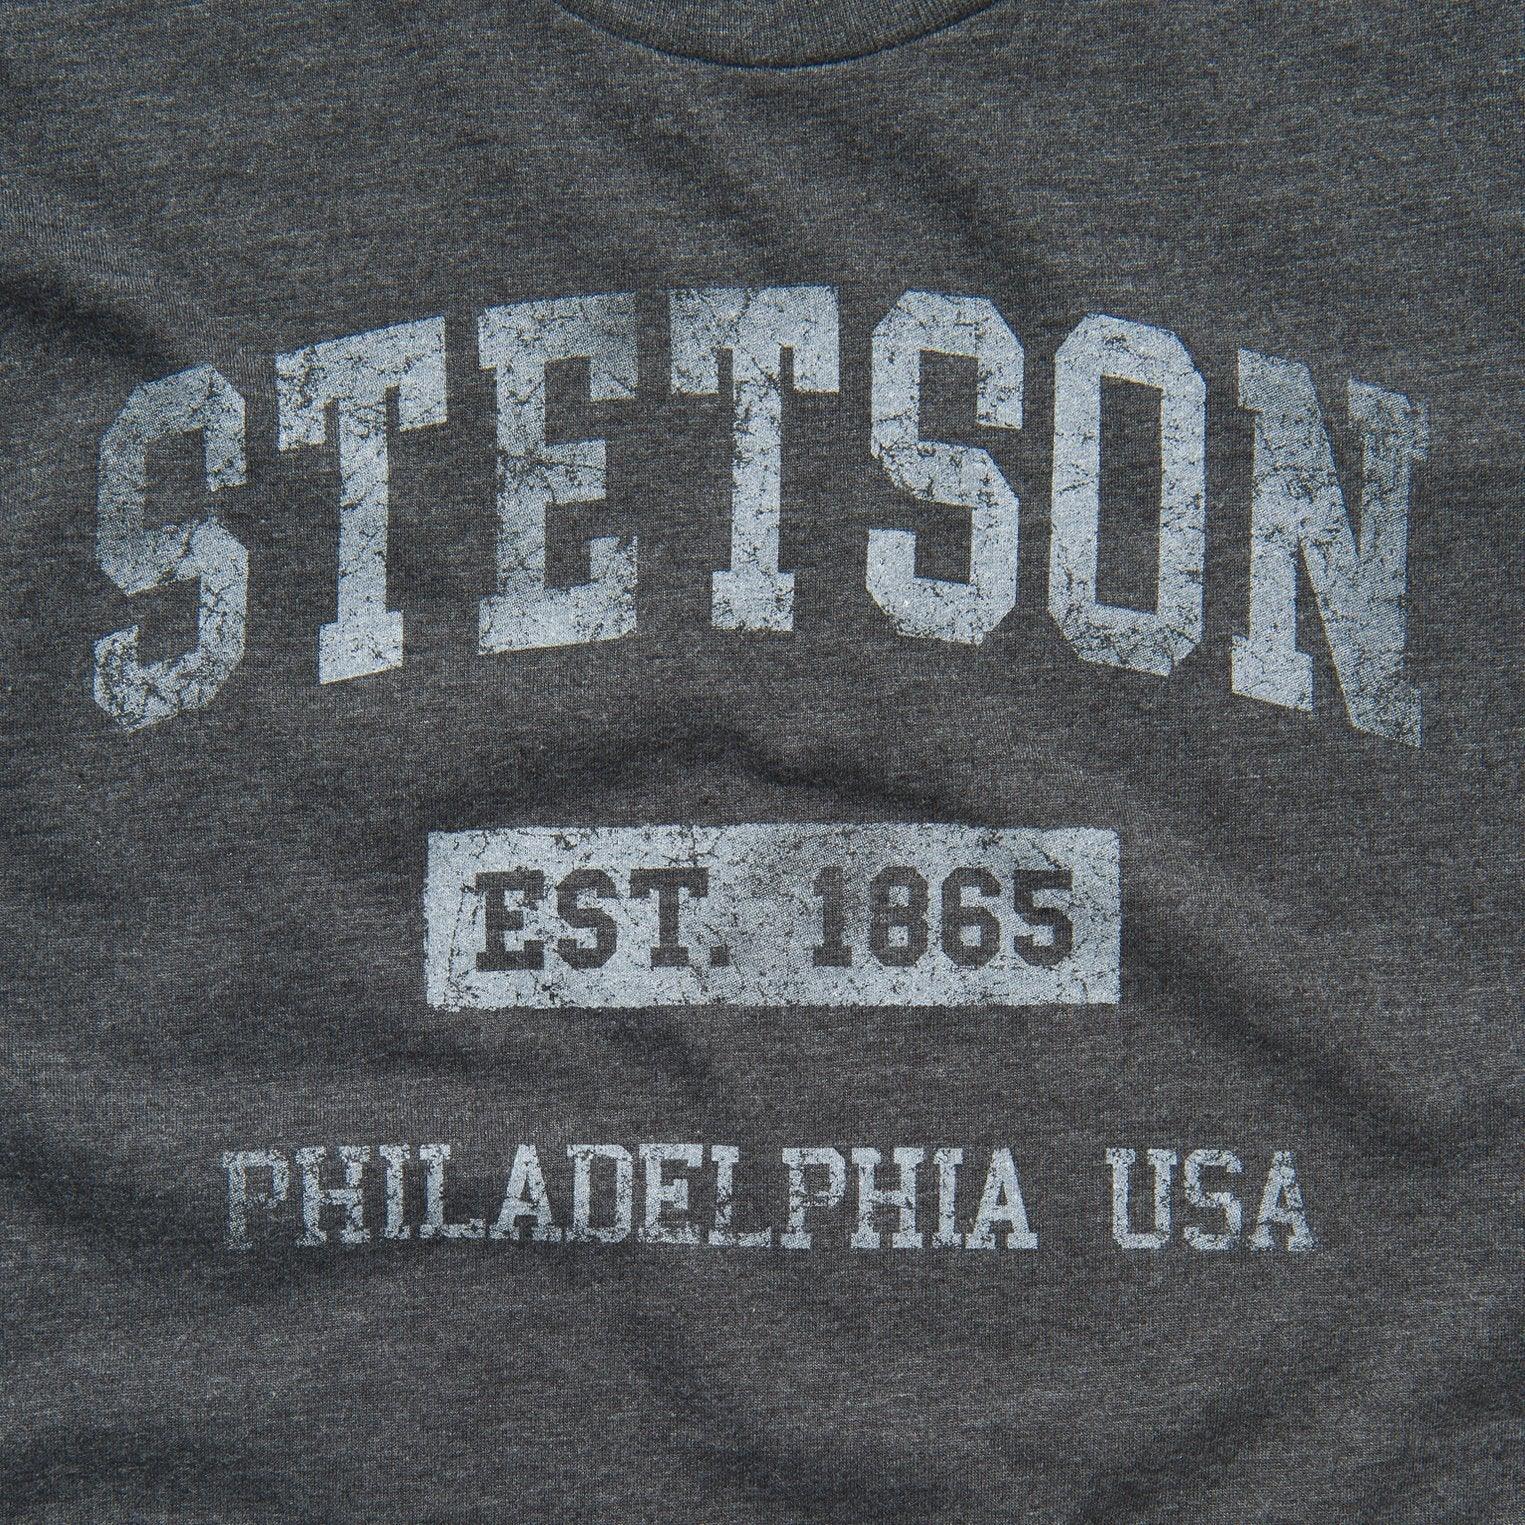 Stetson 1865 Graphic Tee - Flyclothing LLC